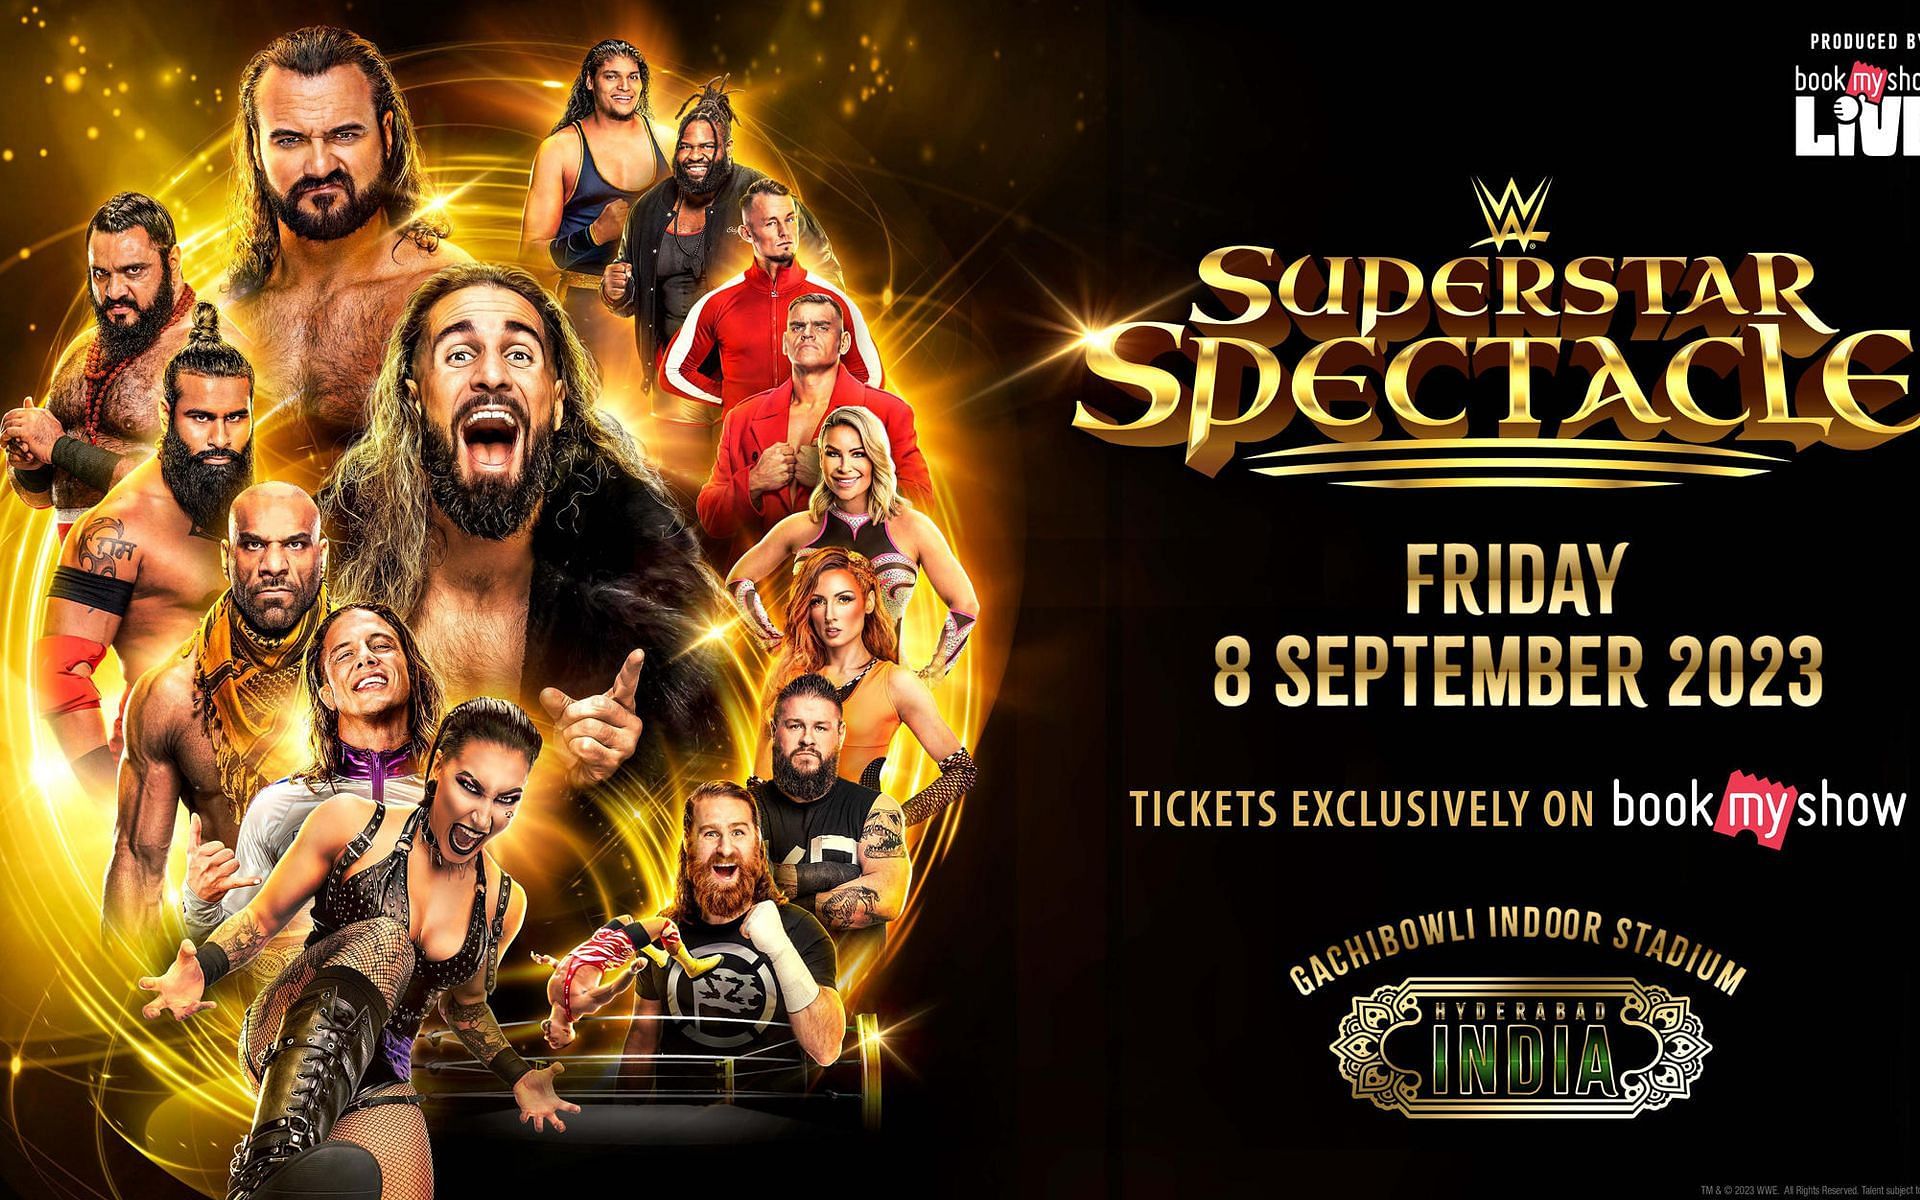 WWE is coming back to India on 8th September 2023